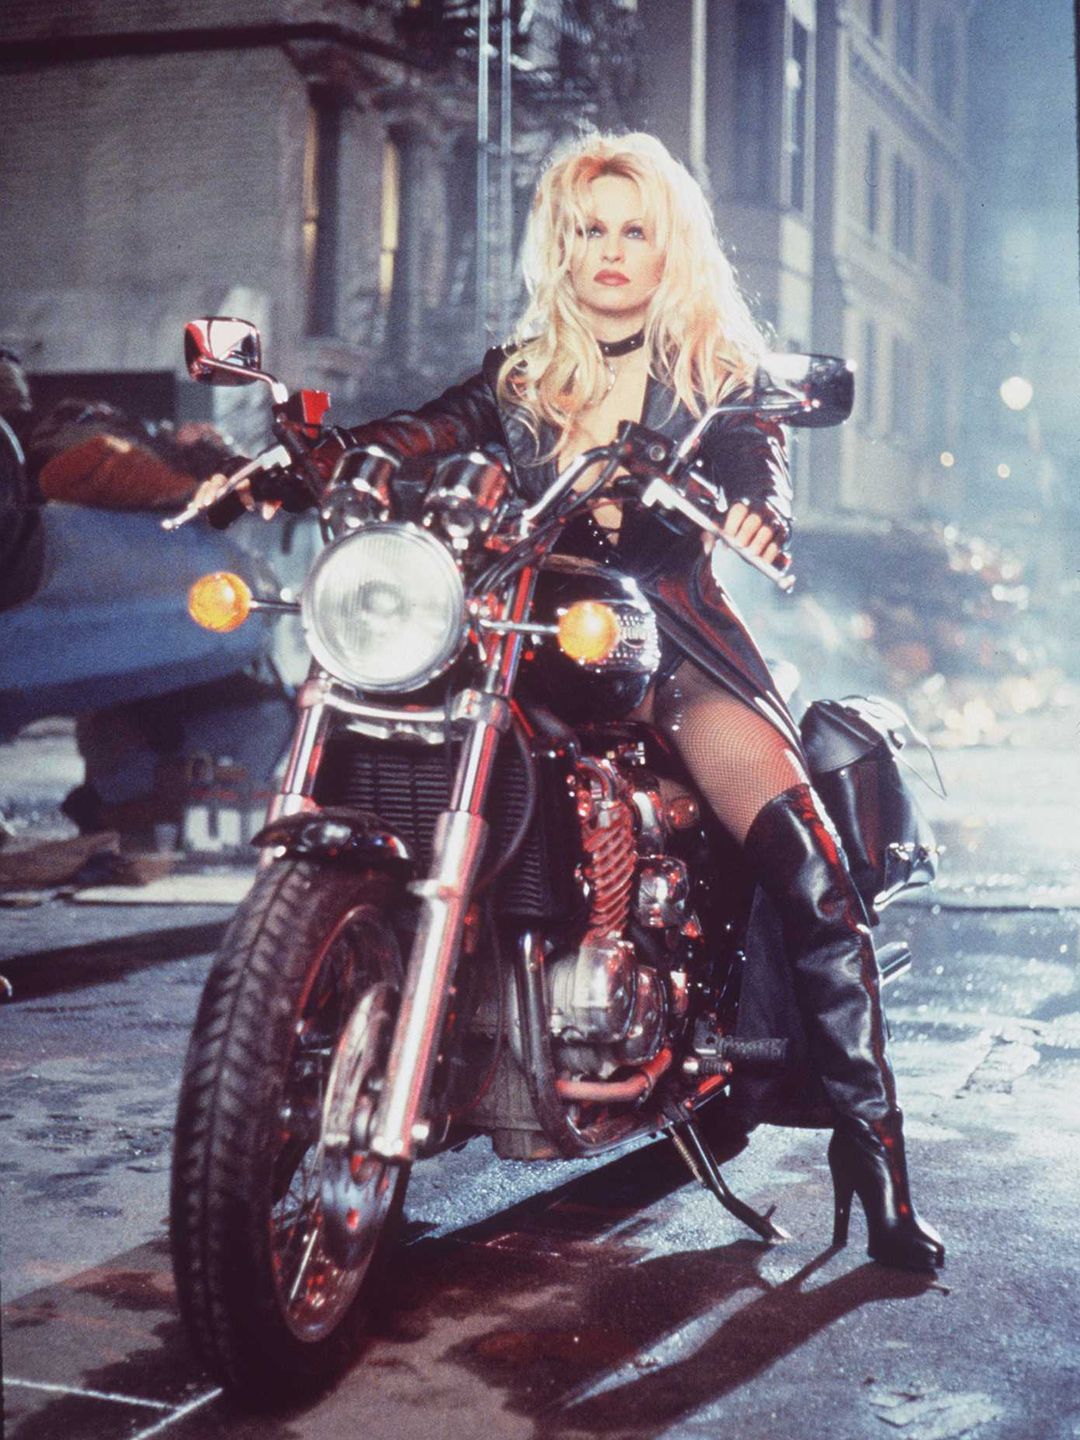 Pamela Anderson appeared in the cult-classic 1996 film 